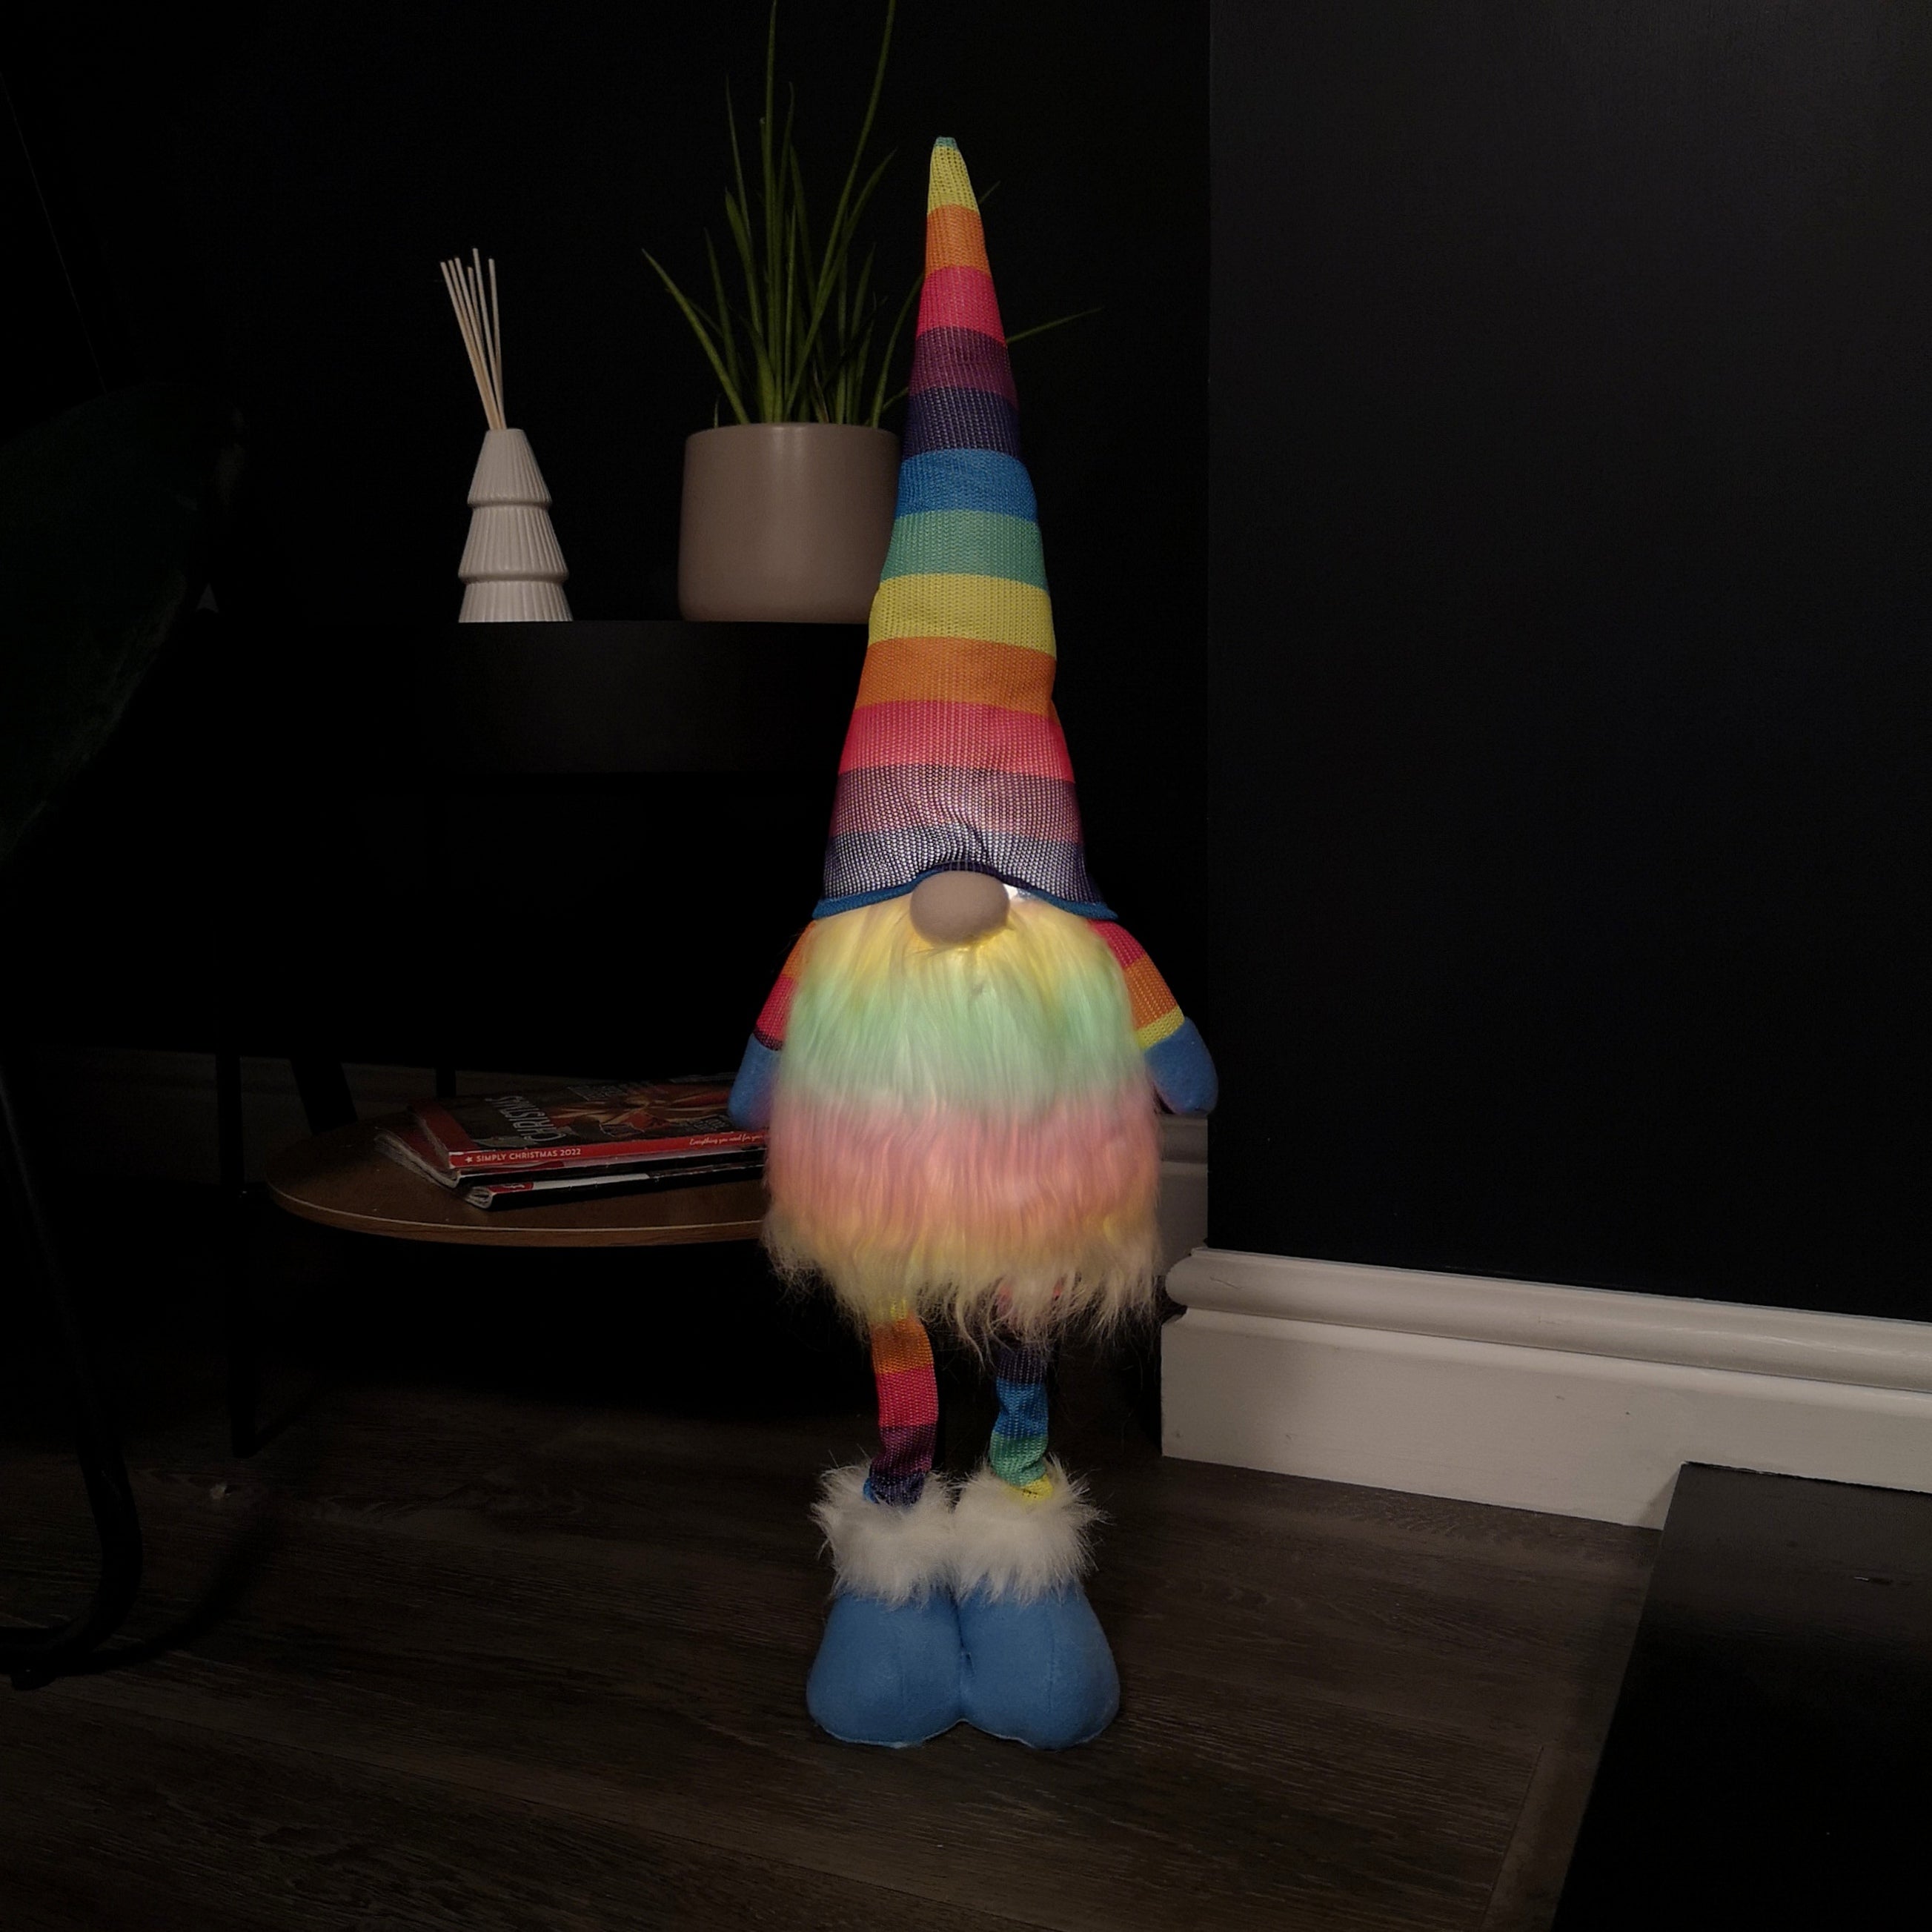 60cm Premier Battery Operated Lit Standing Christmas Rainbow Gonk